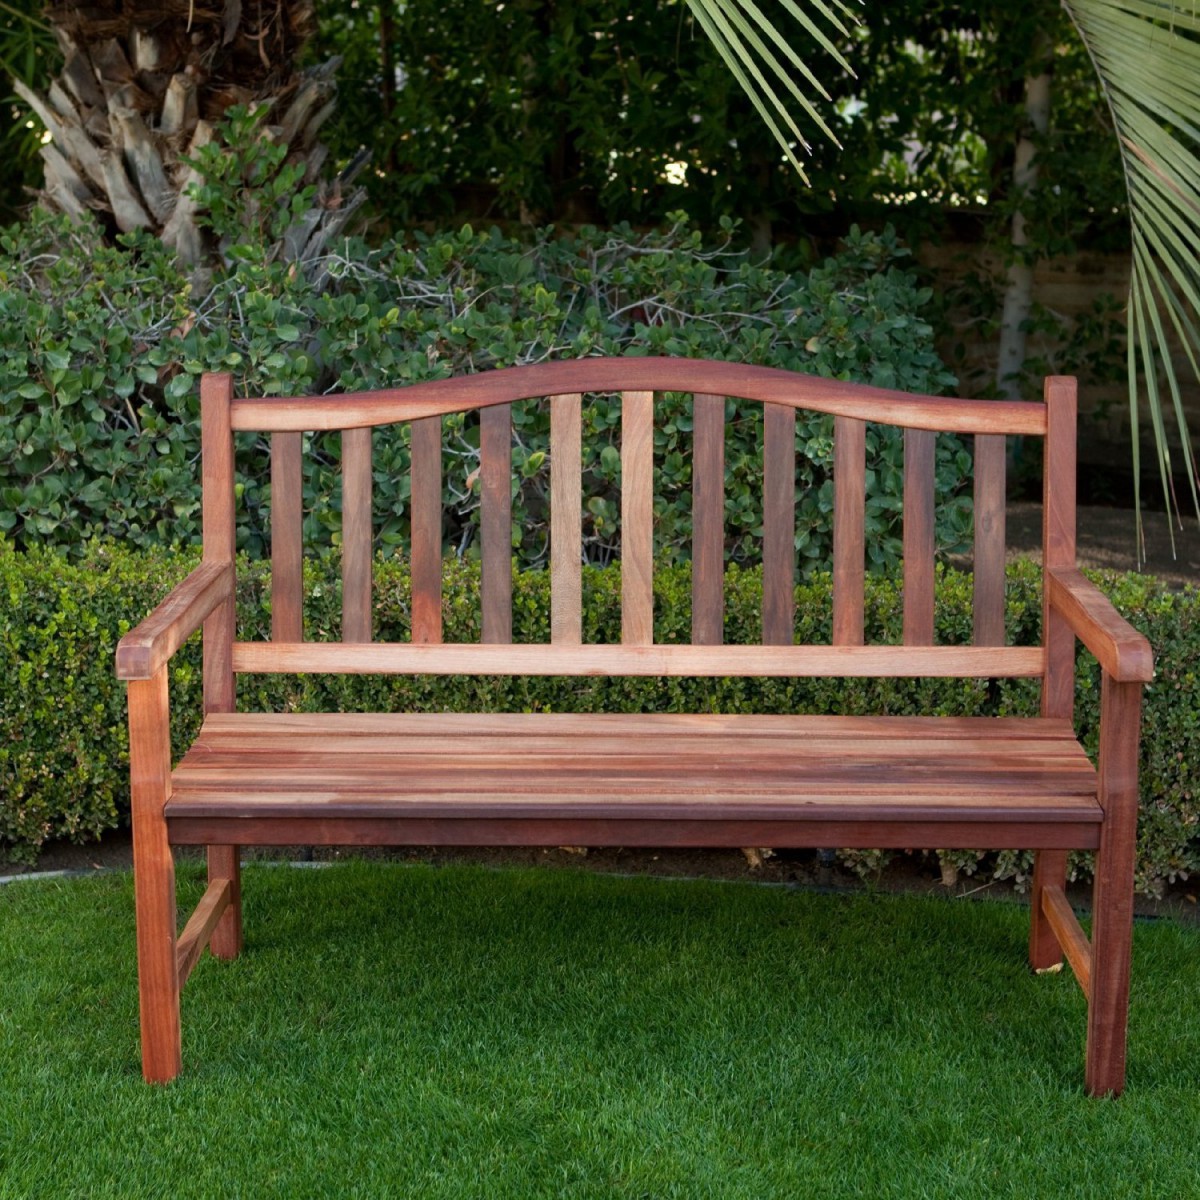 Belham Living Richmond 4 Foot Outdoor Wood Bench with Curved Back